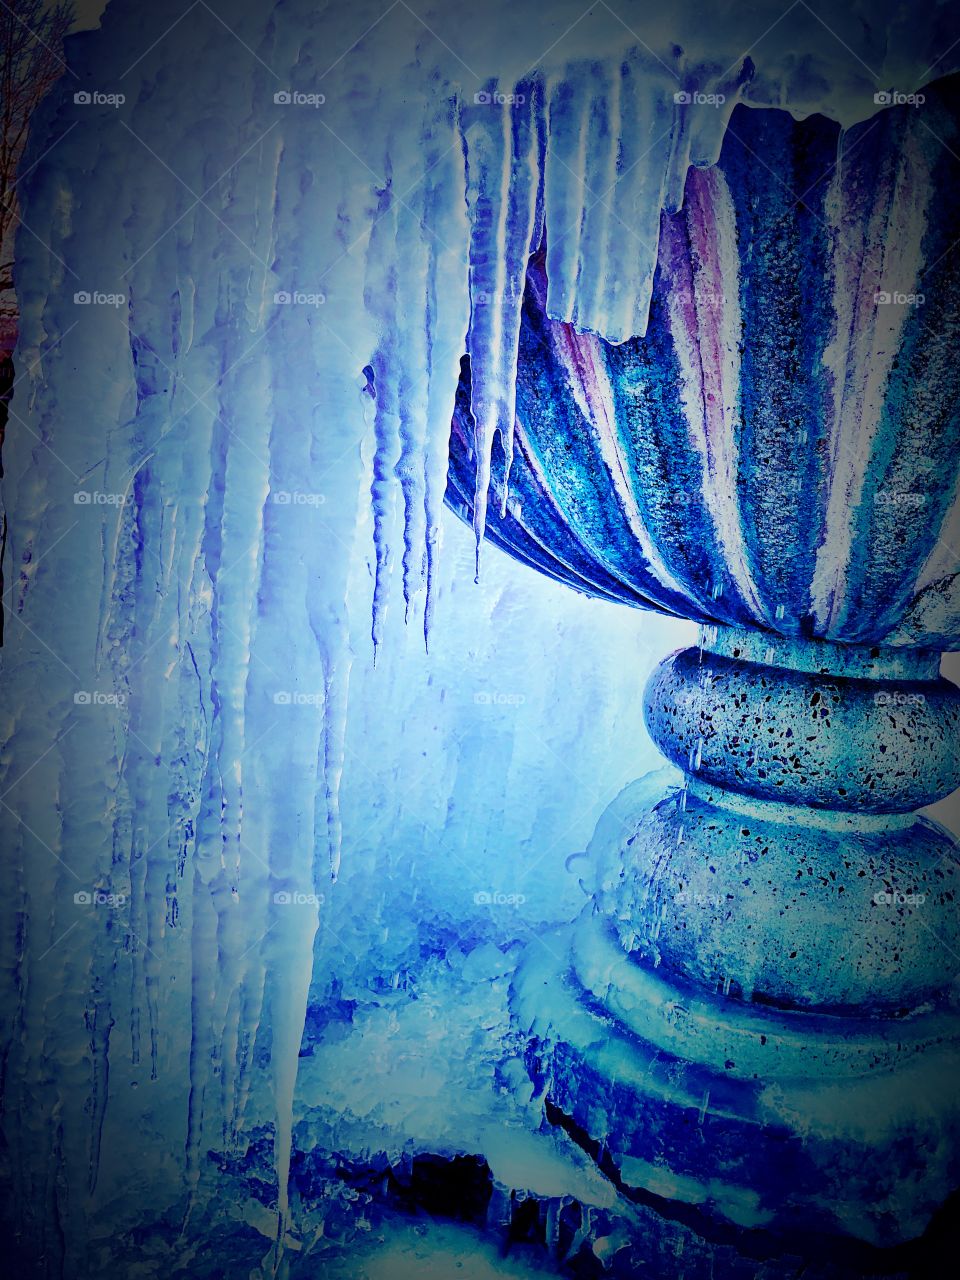 Frozen water fountain close up on dripping icicles 